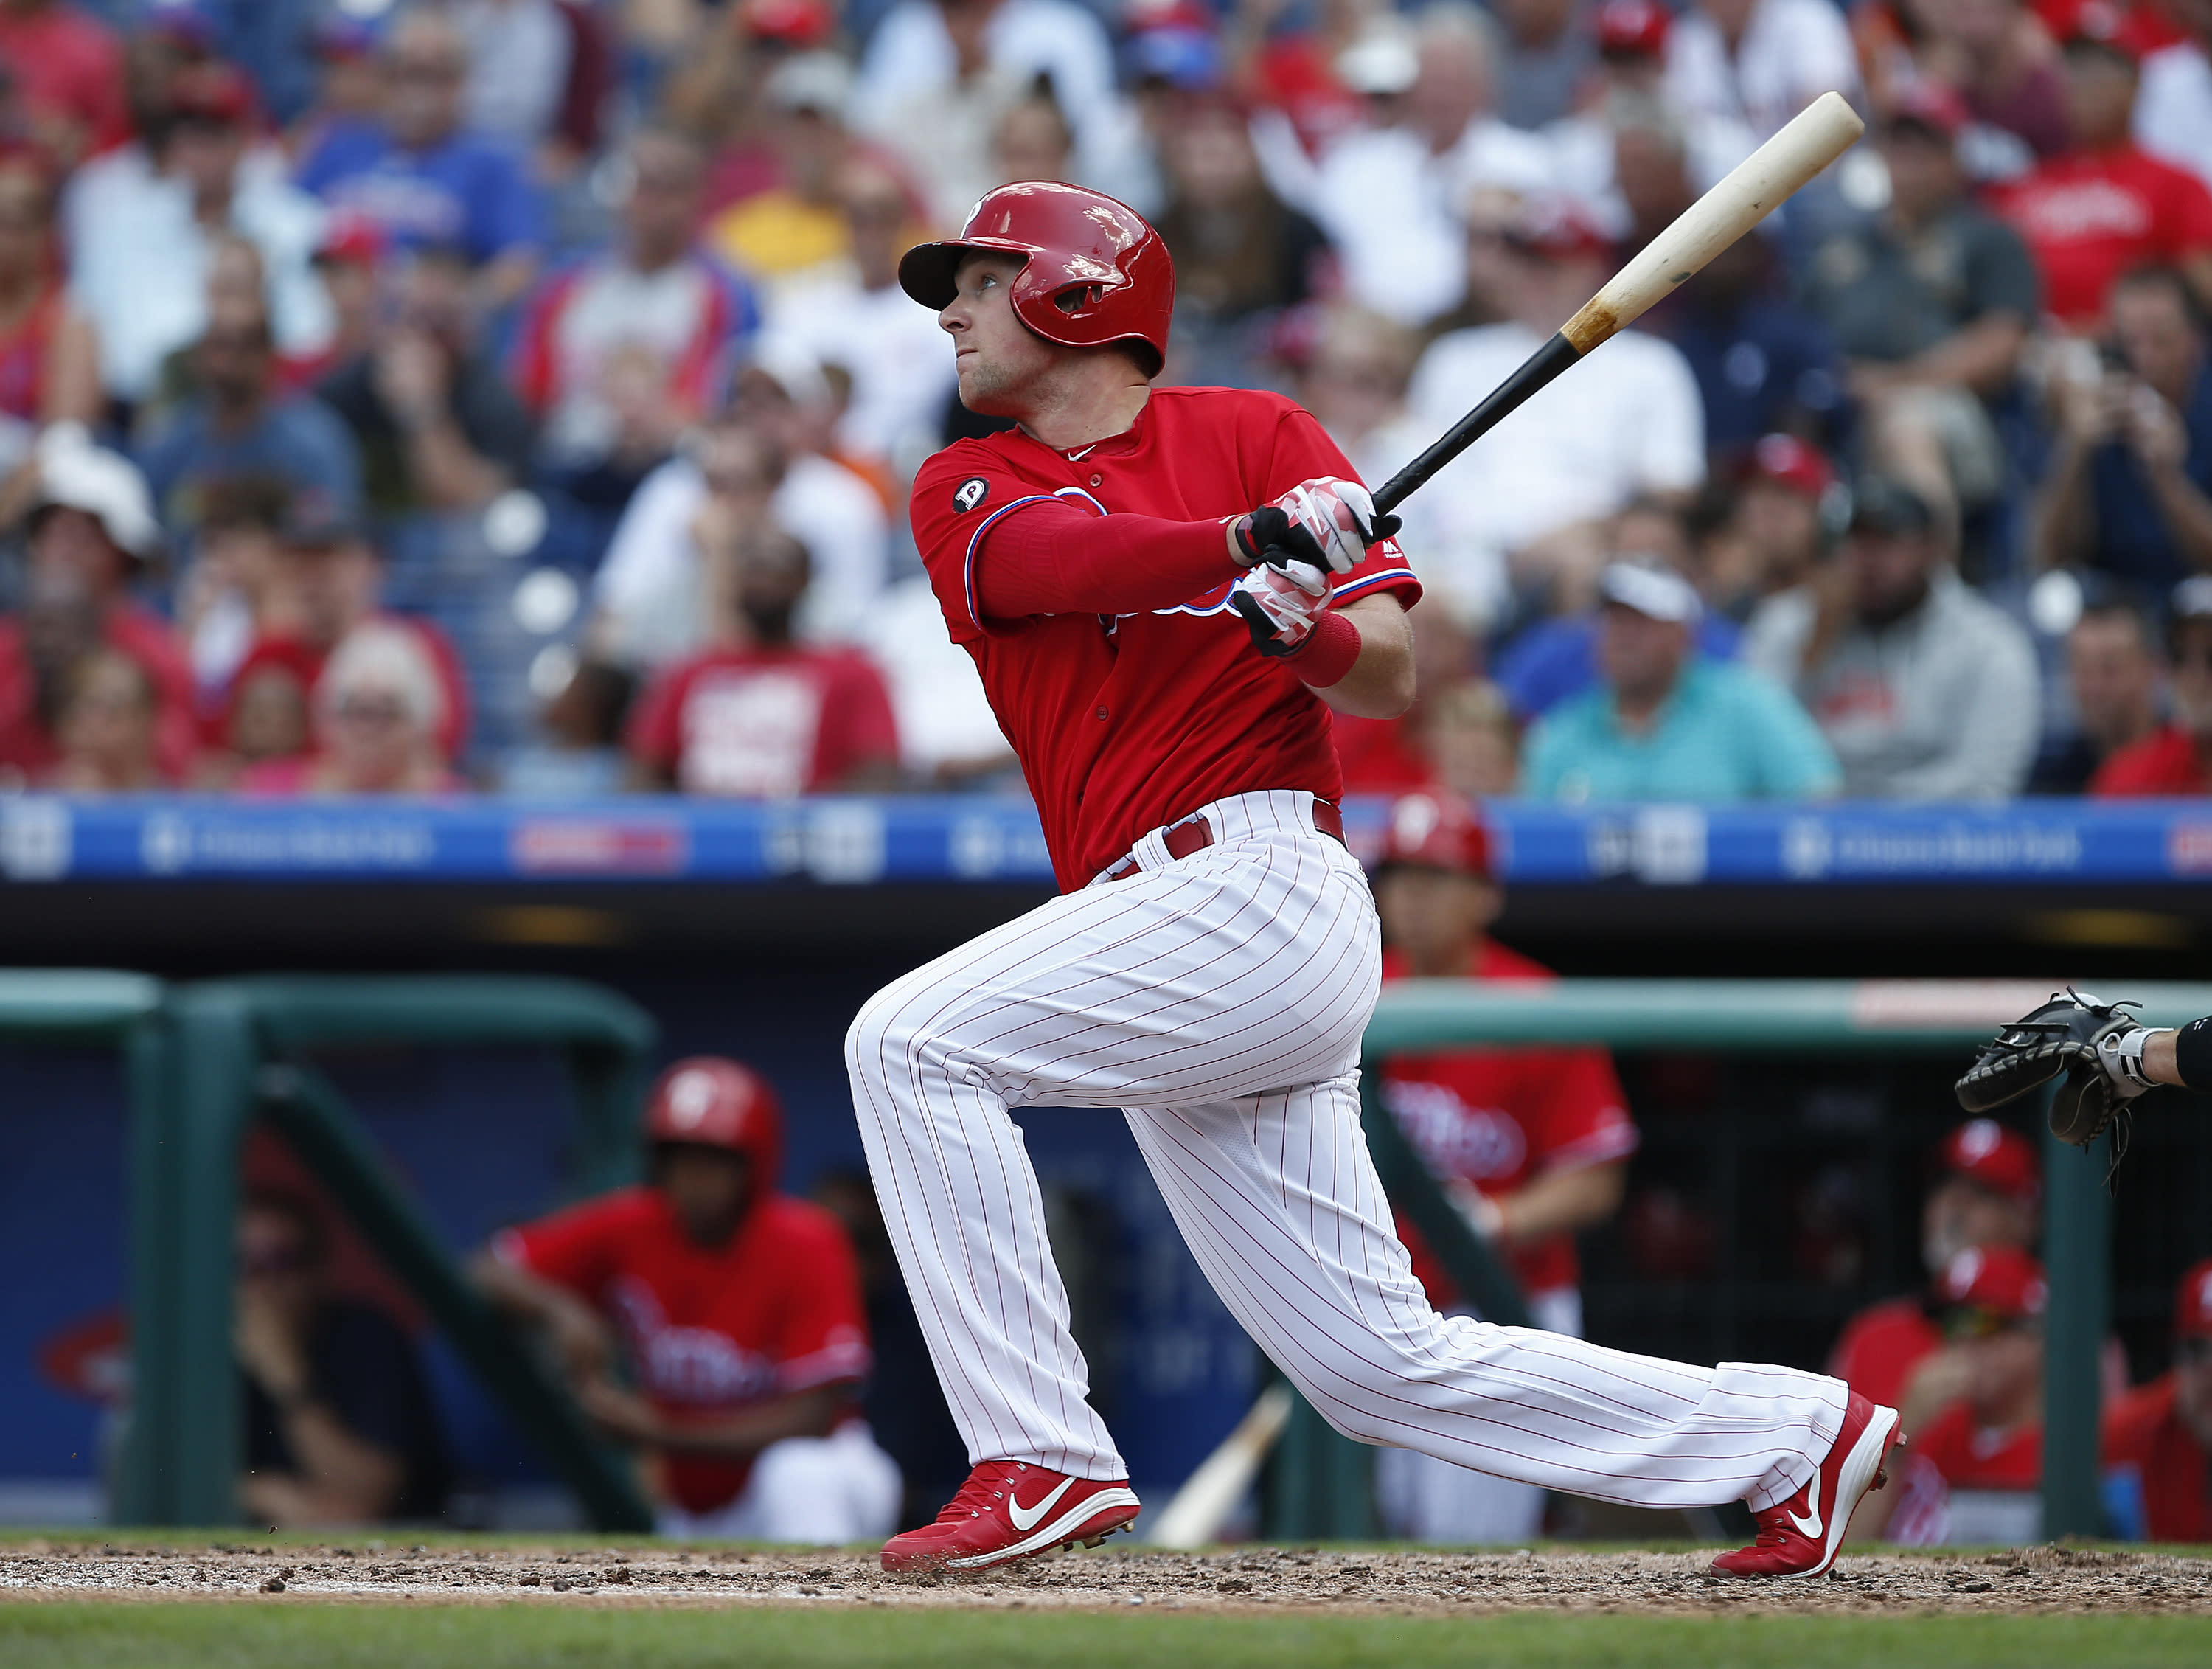 Rhys Hoskins is homering his way into 